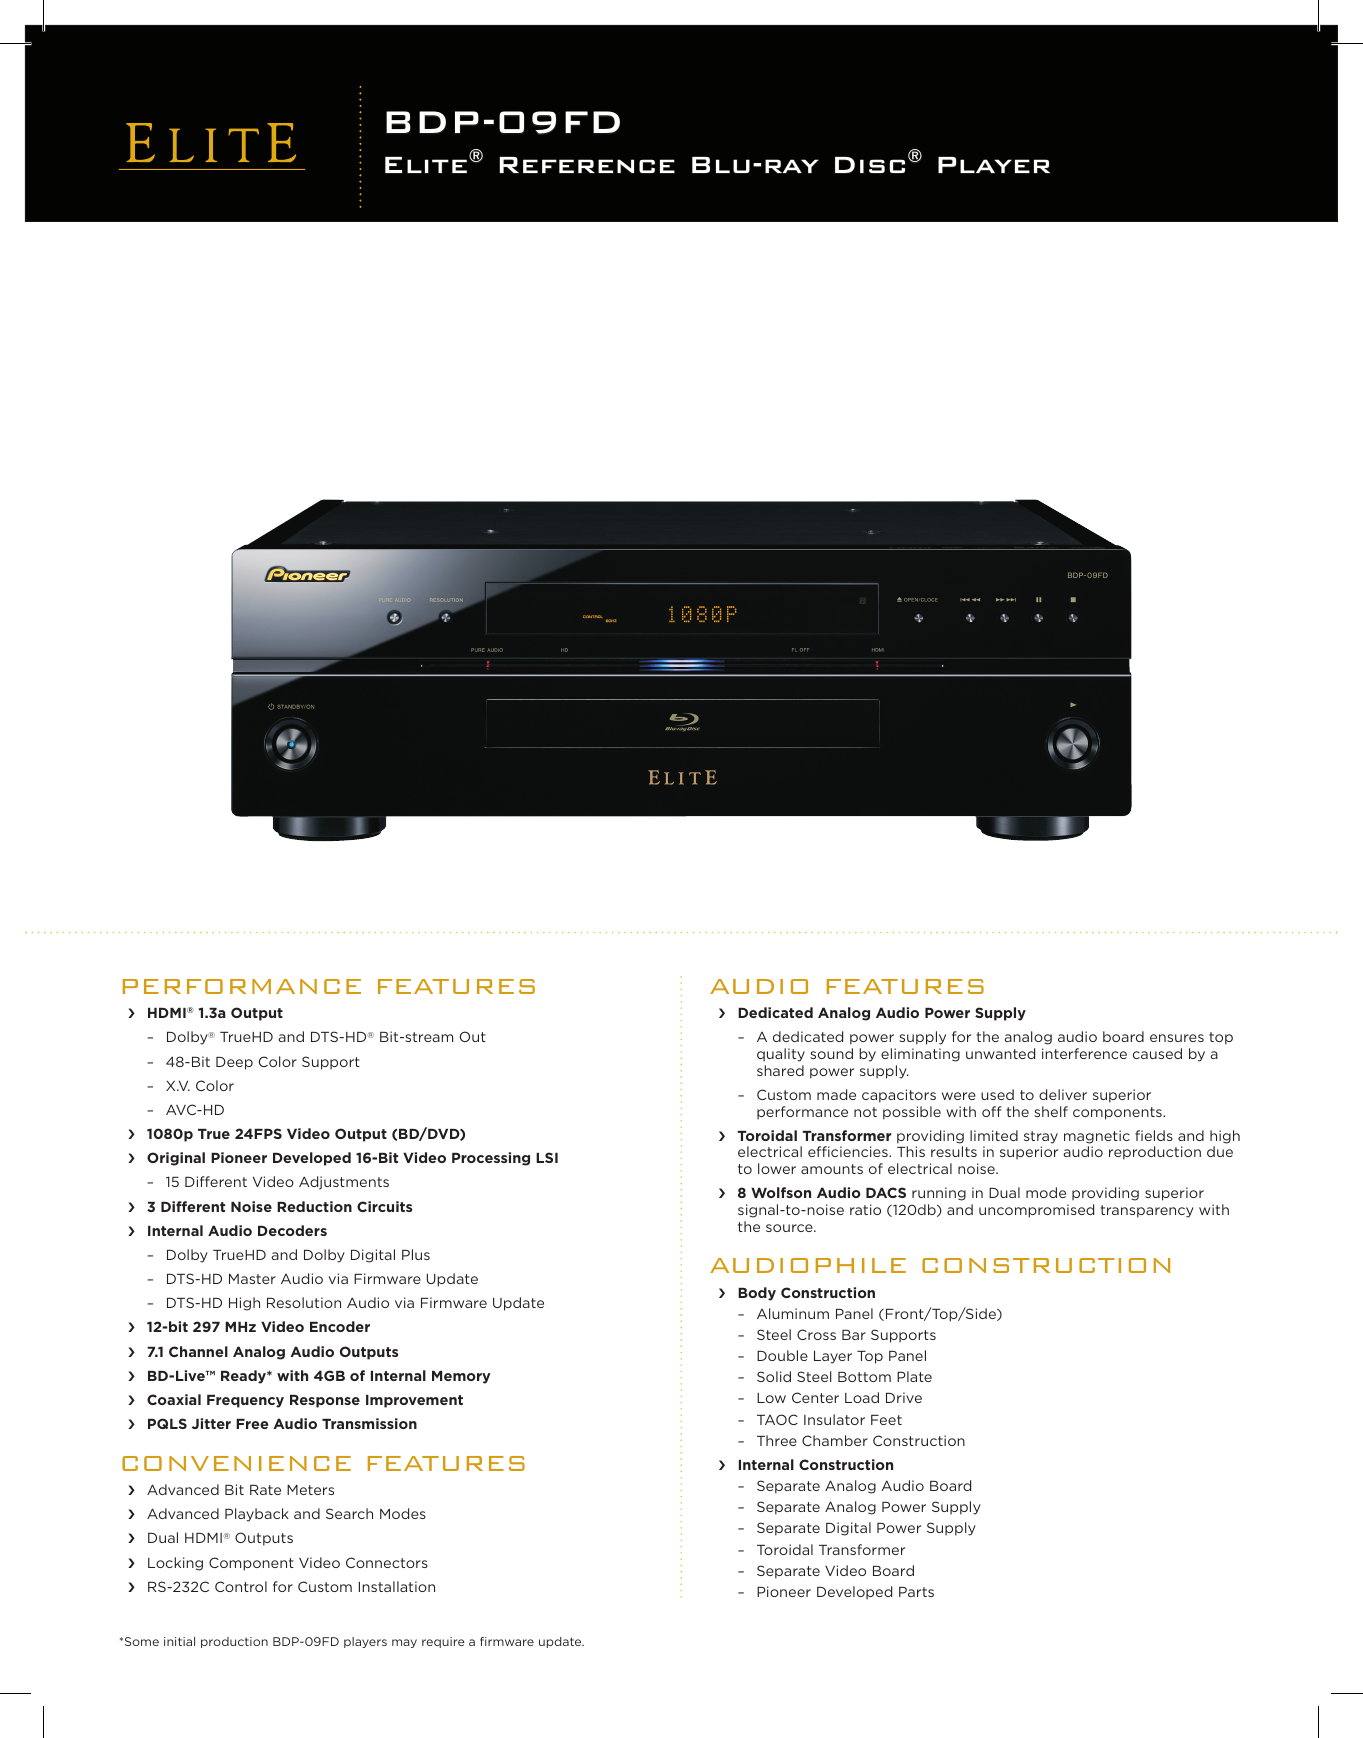 Page 1 of 2 - Elite Elite-Blu-Ray-Disc-Players-Bdp-09Fd-Users-Manual- BDP-09FD  Elite-blu-ray-disc-players-bdp-09fd-users-manual